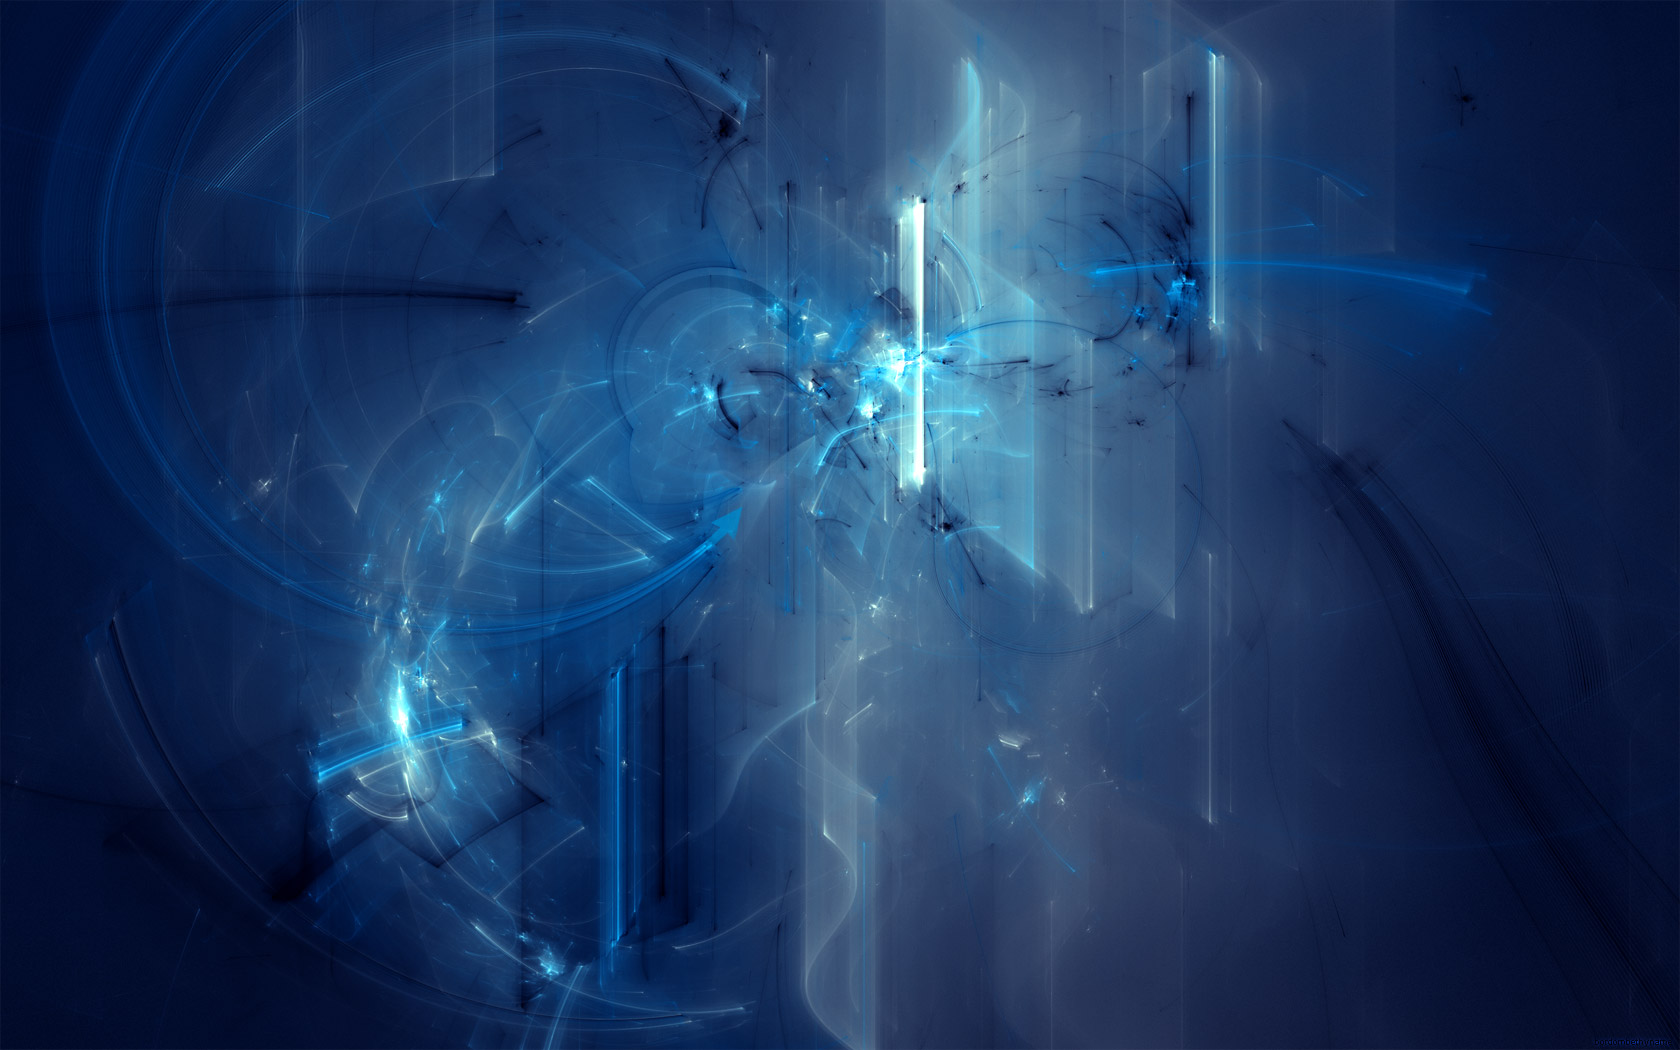 Tapety HD - Abstract-Blue-46207.jpg